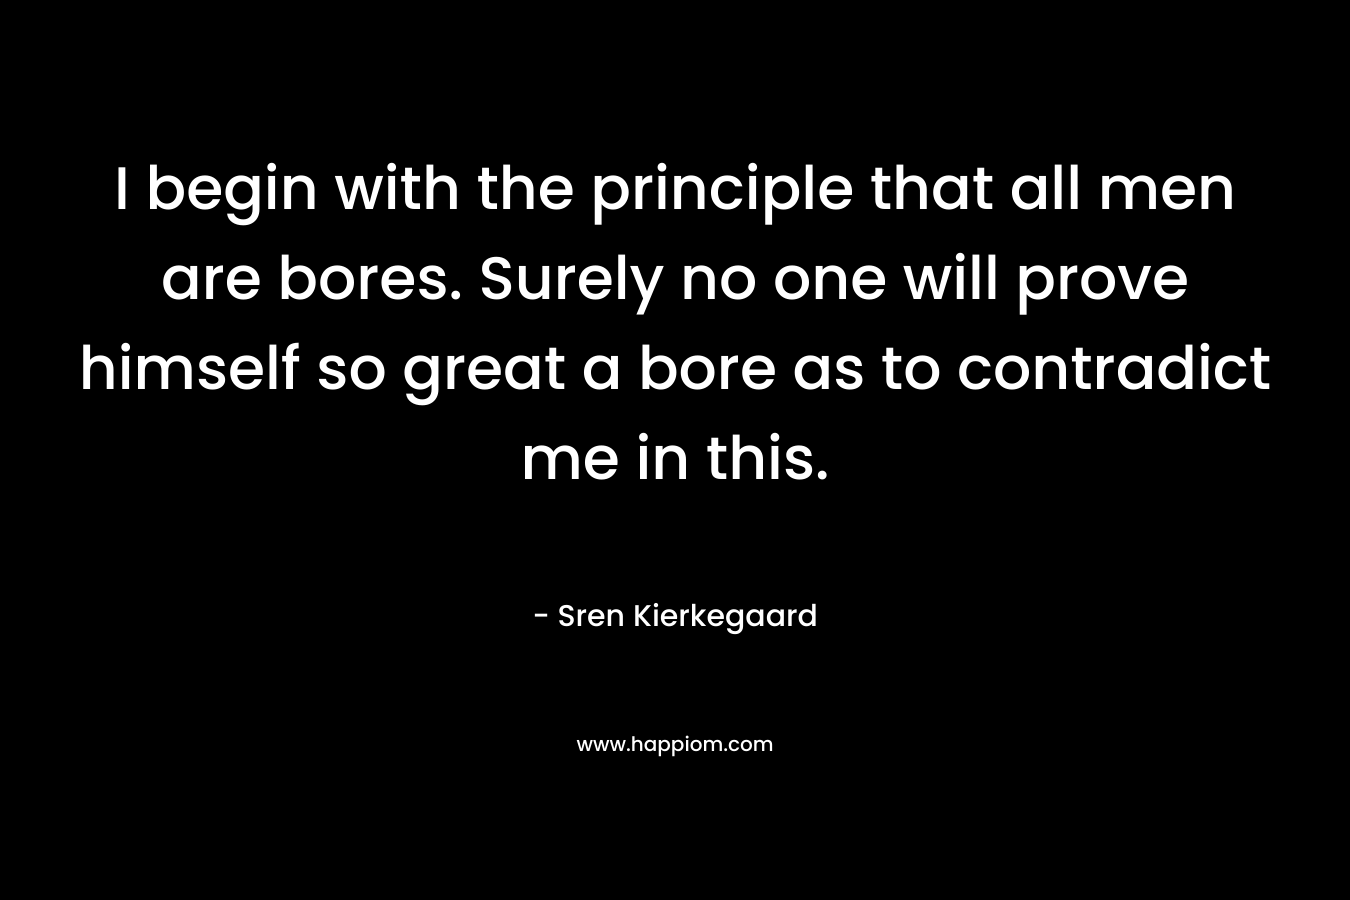 I begin with the principle that all men are bores. Surely no one will prove himself so great a bore as to contradict me in this. – Sren Kierkegaard